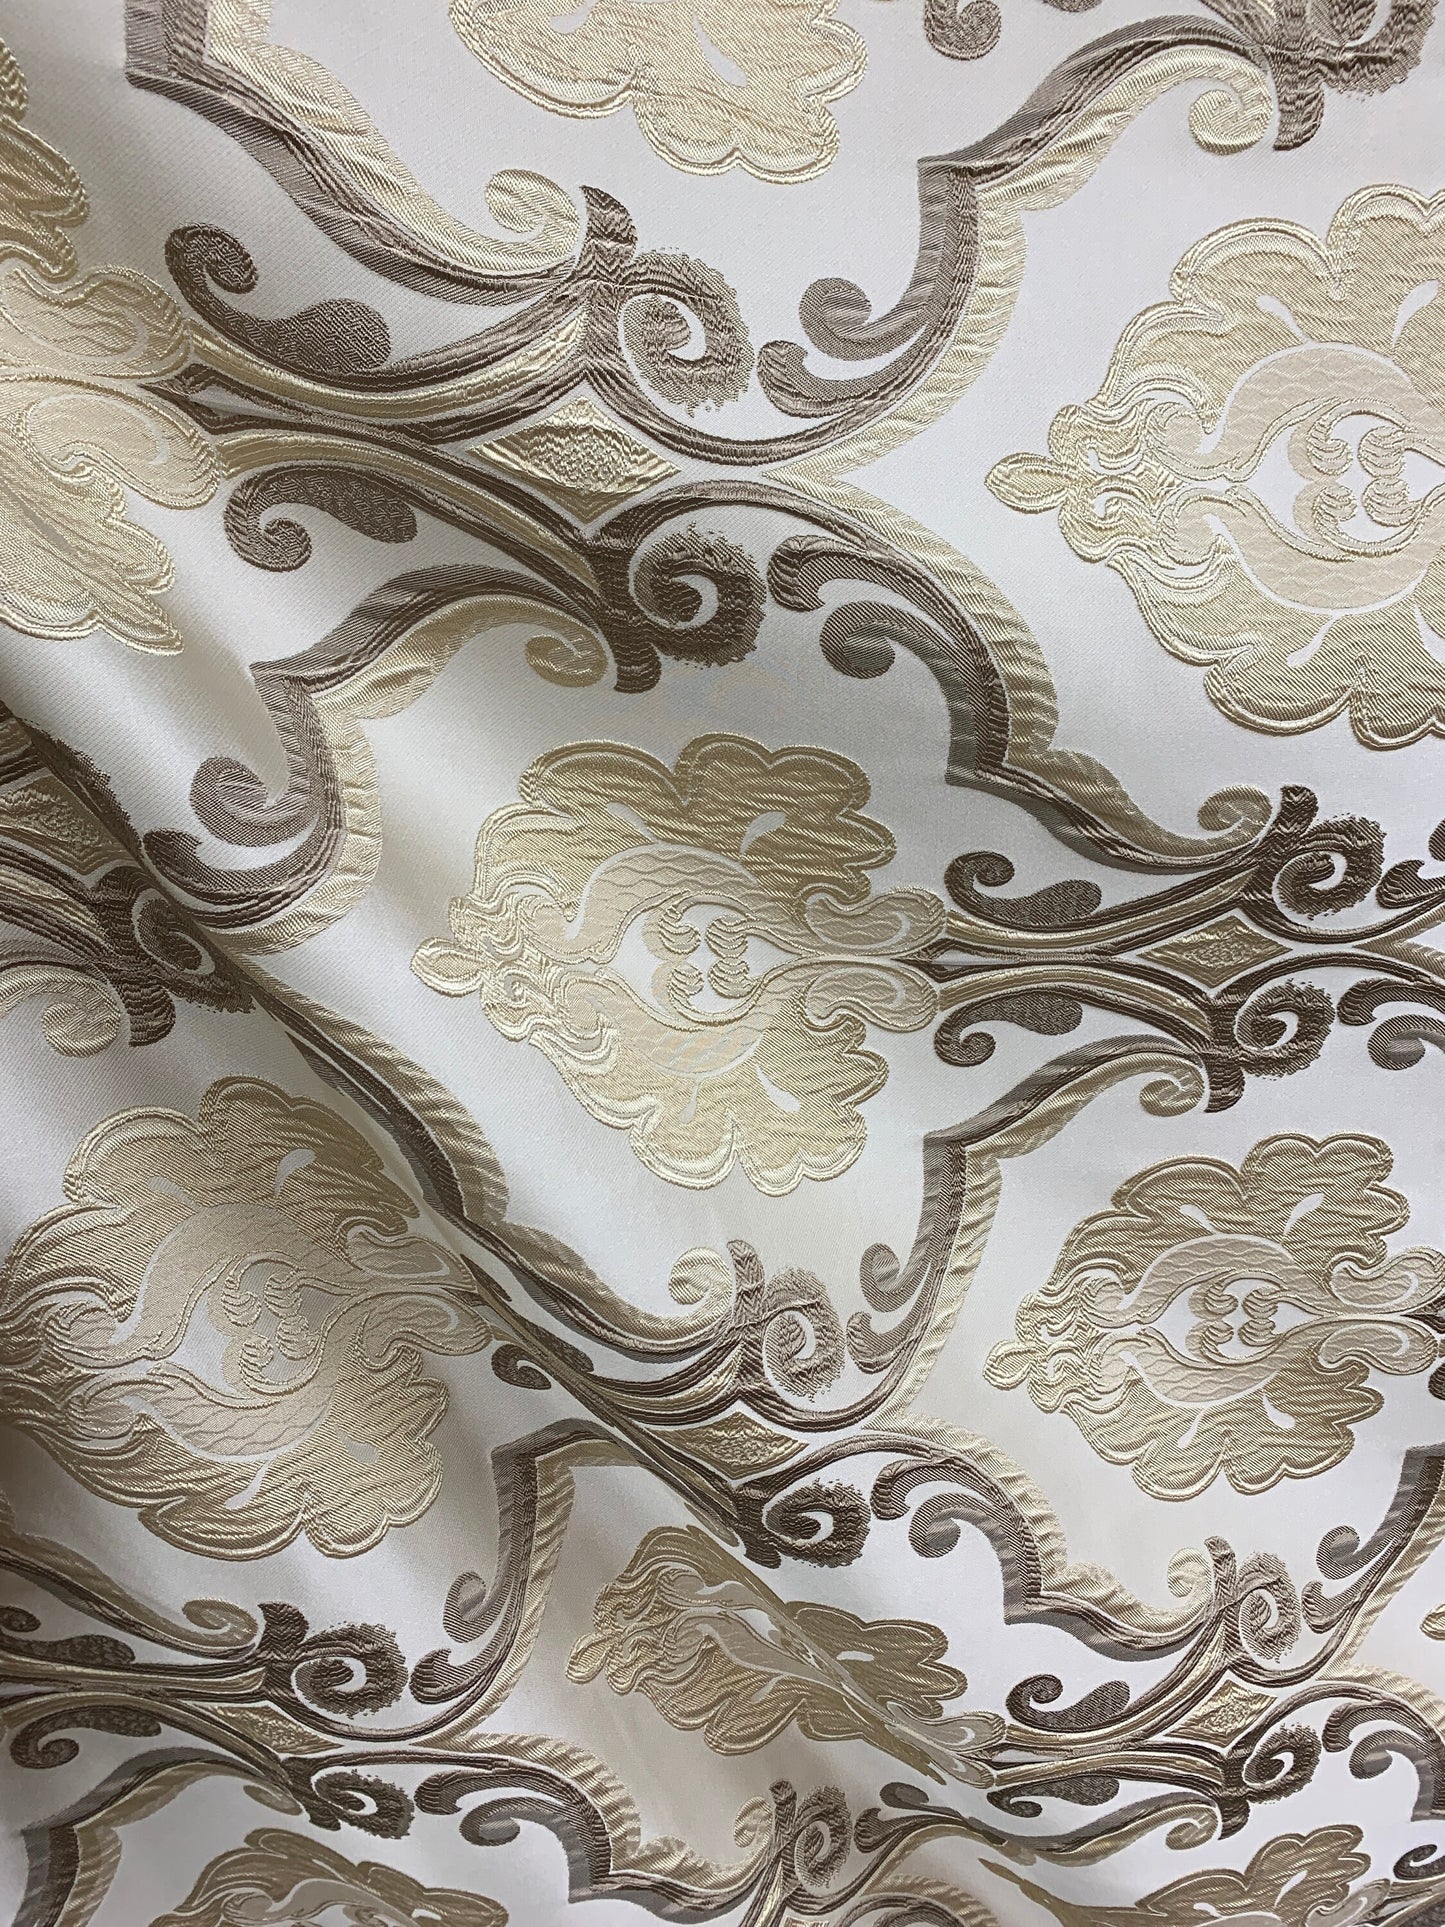 BEIGE TAUPE Damask Brocade Upholstery Drapery Fabric (54 in.) Sold By The Yard